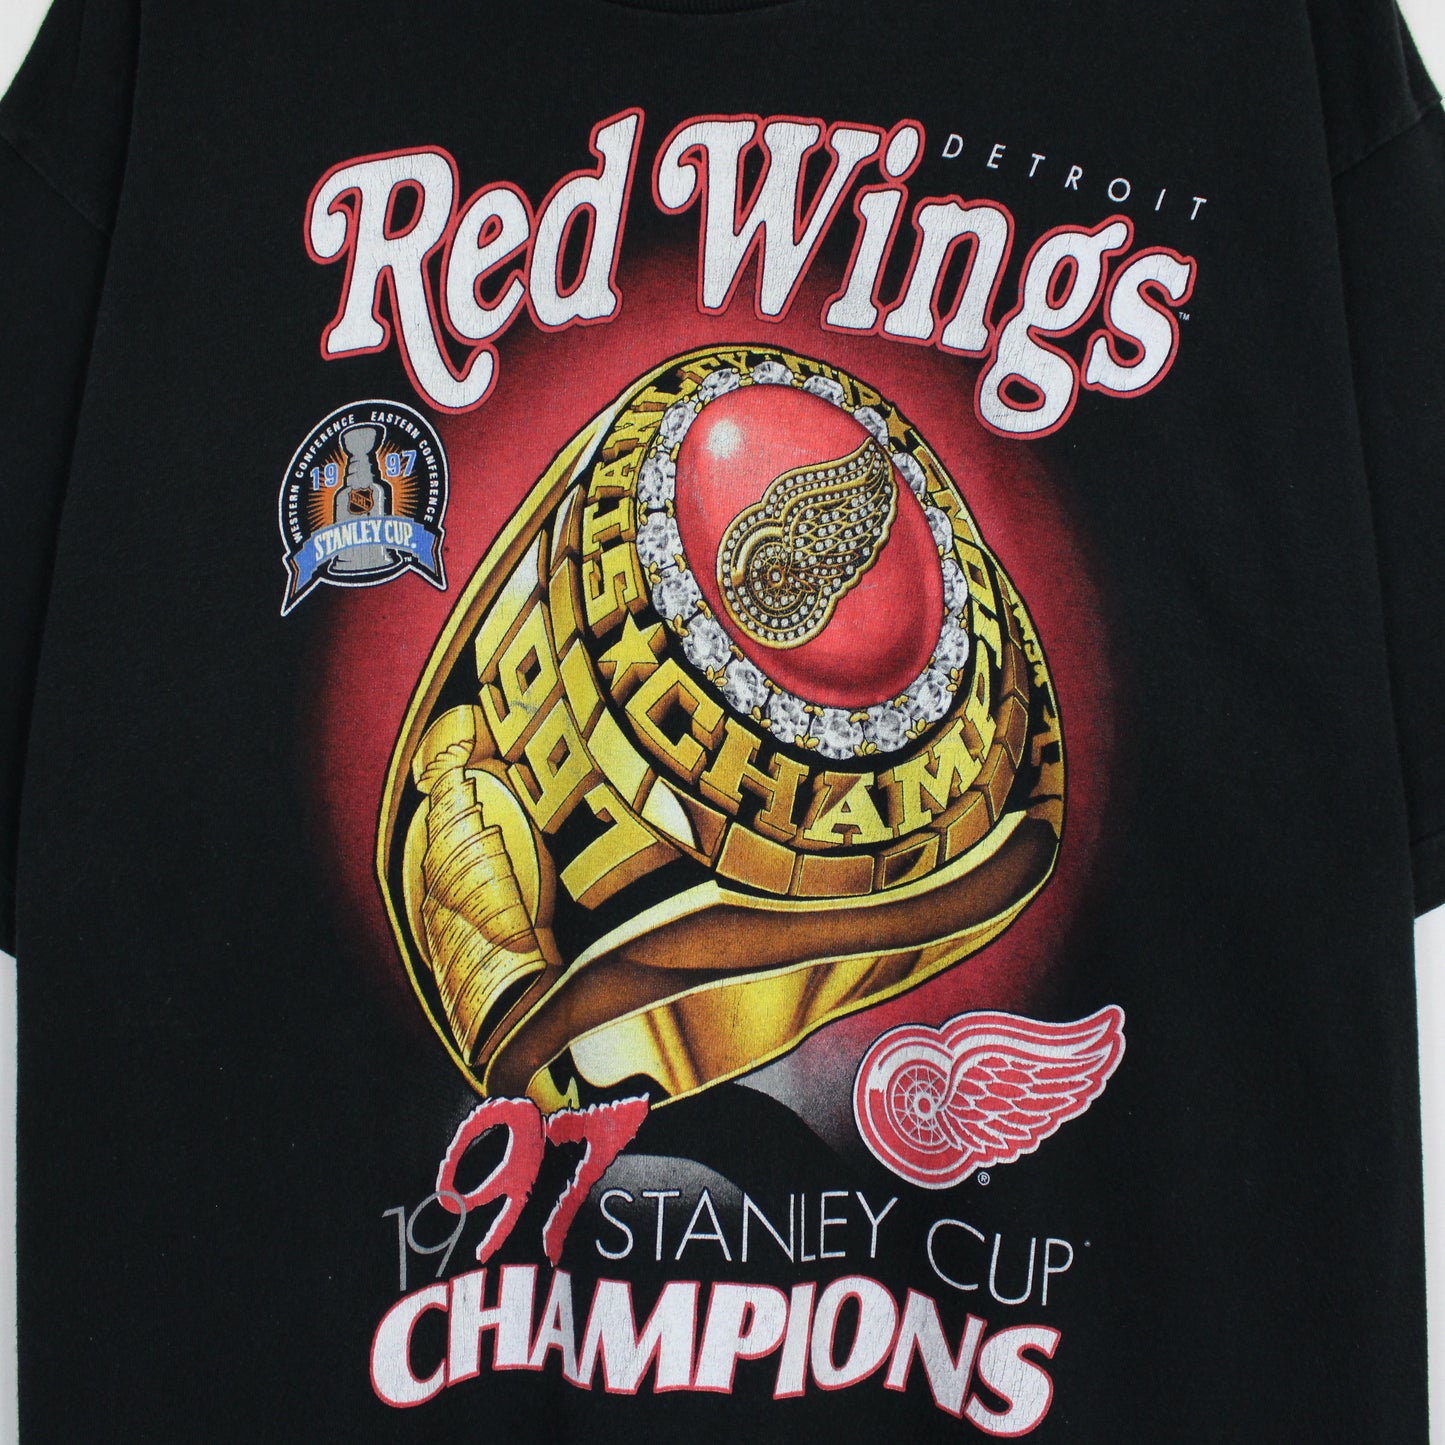 Vintage 1997 Detroit Red Wings NHL Champions Tee - XL